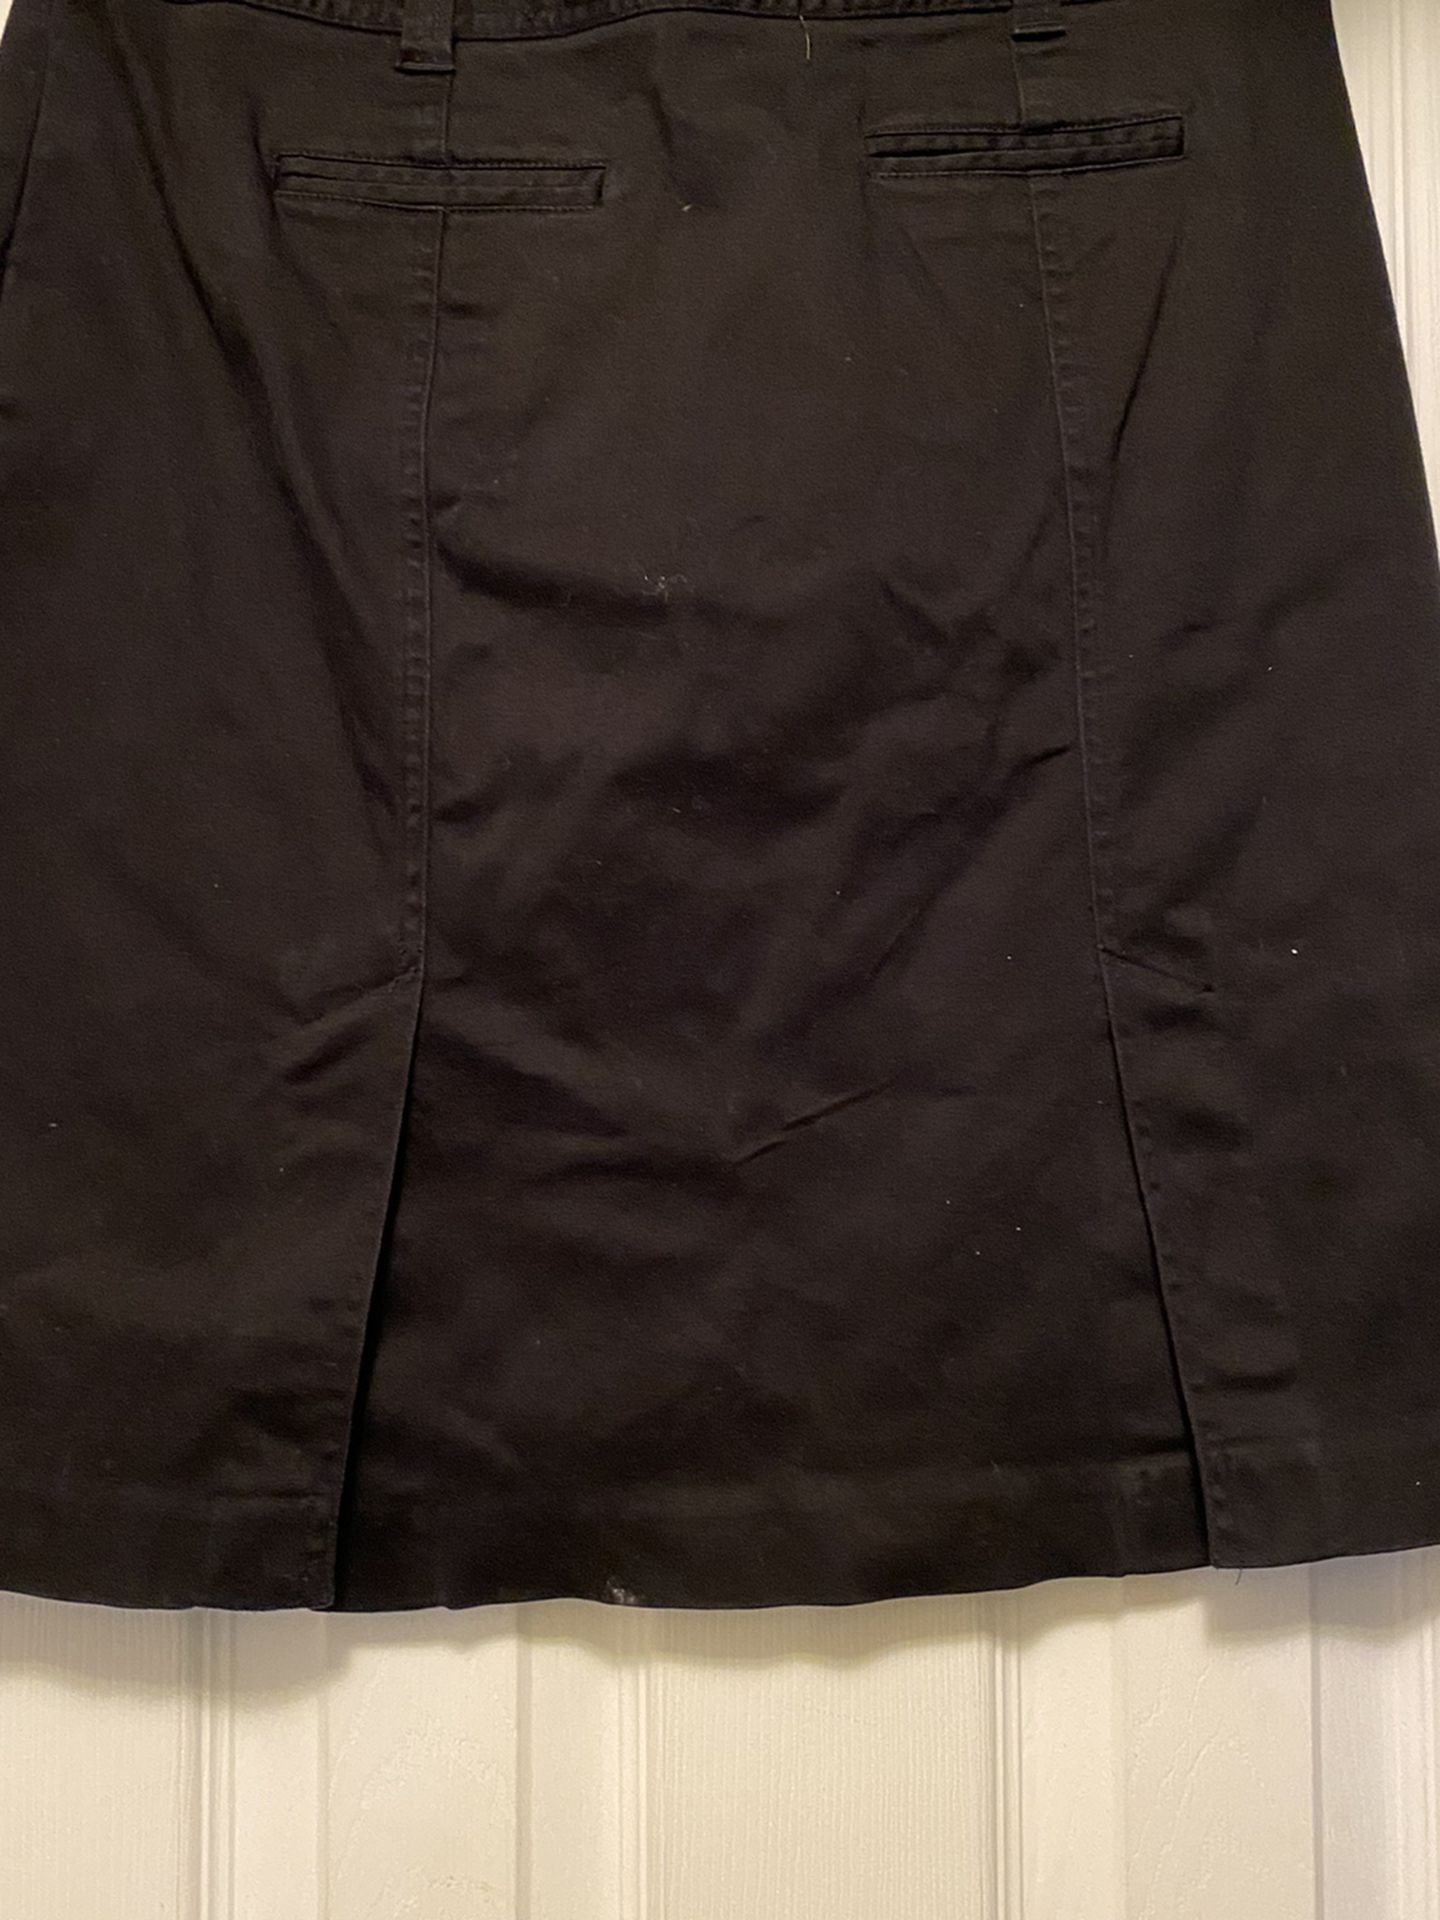 Ladies Black Skirt Size 10 By Goode Clothes